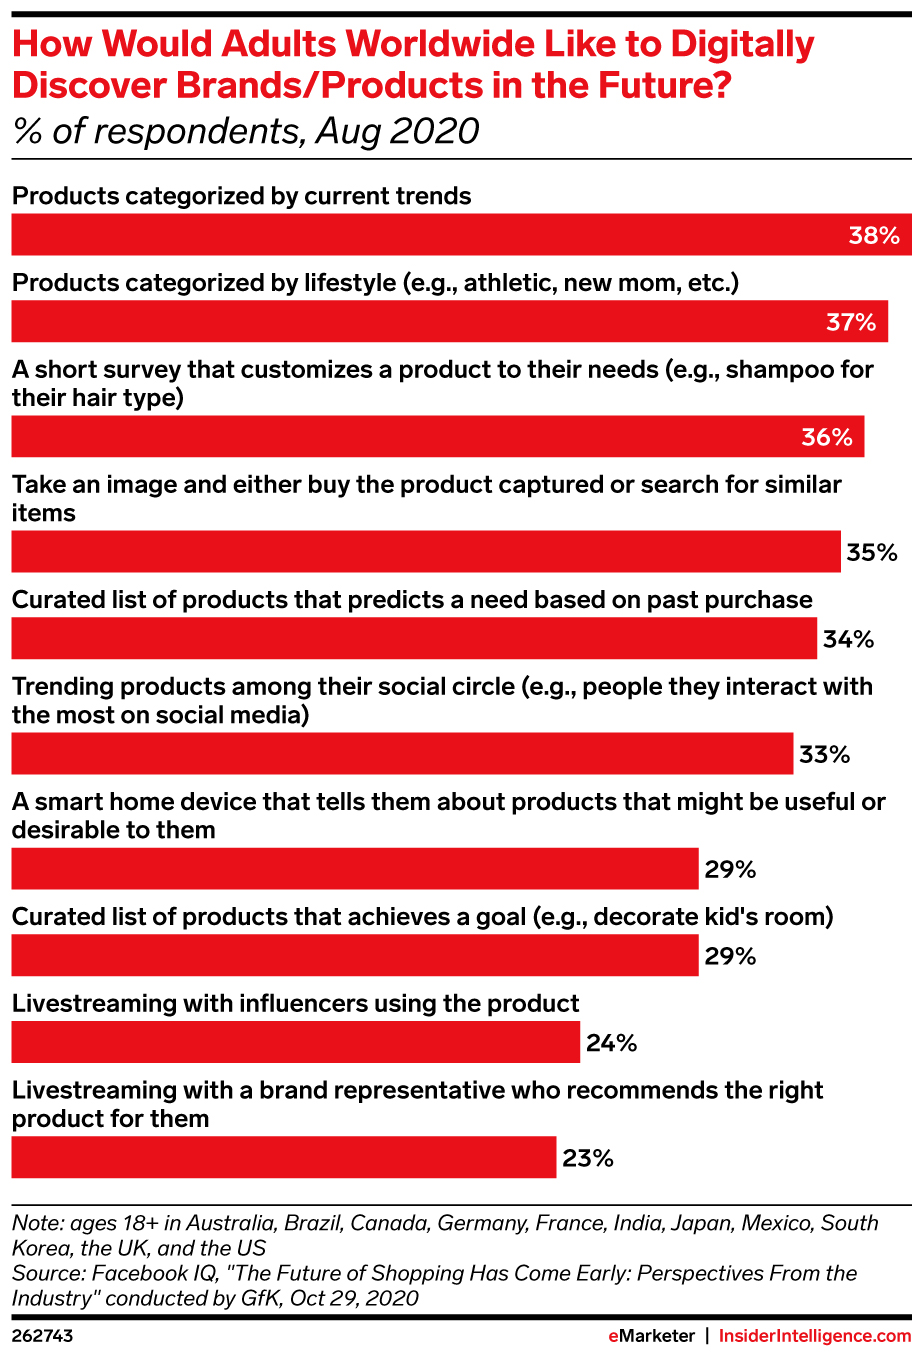 How Would Adults Worldwide Like to Digitally Discover Brands/Products in the Future? (% of respondents, Aug 2020)